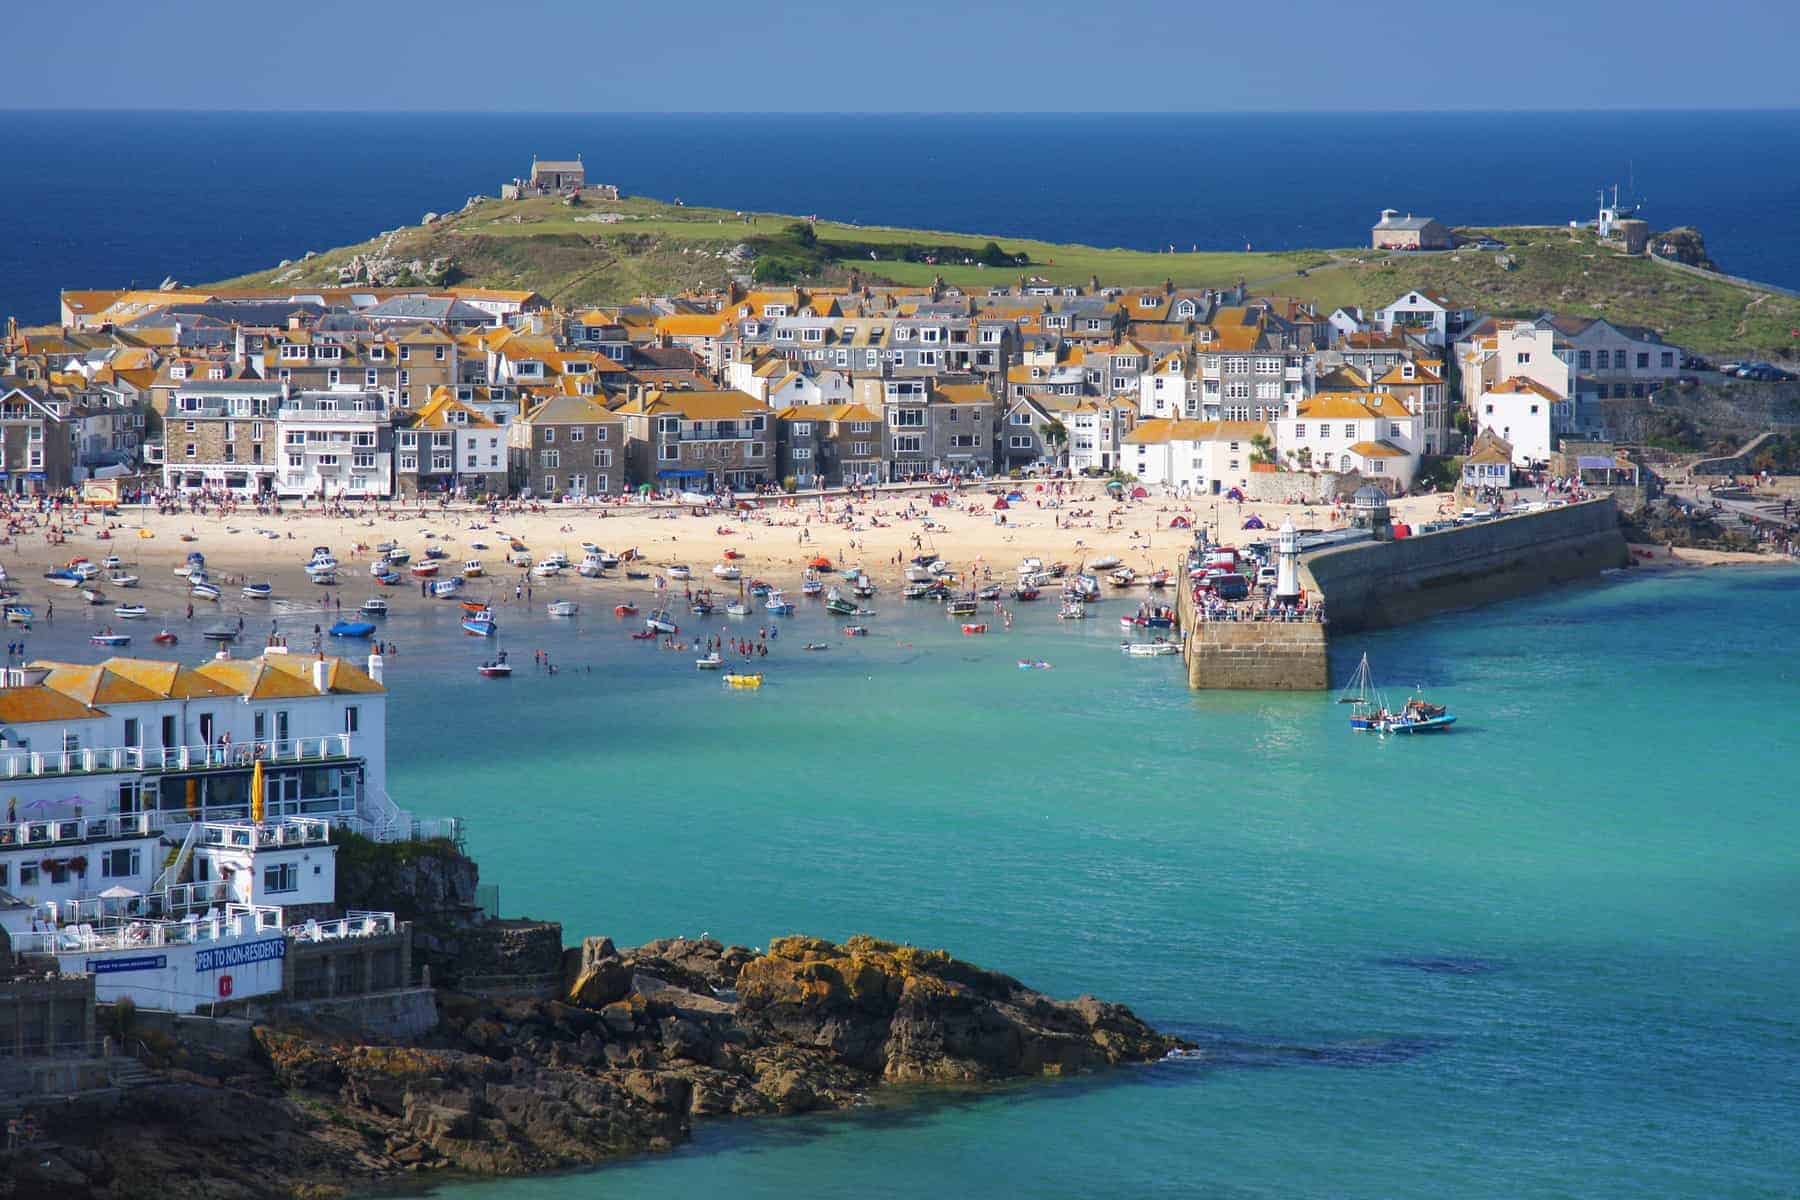 The seaside village of St Ives in Cornwall